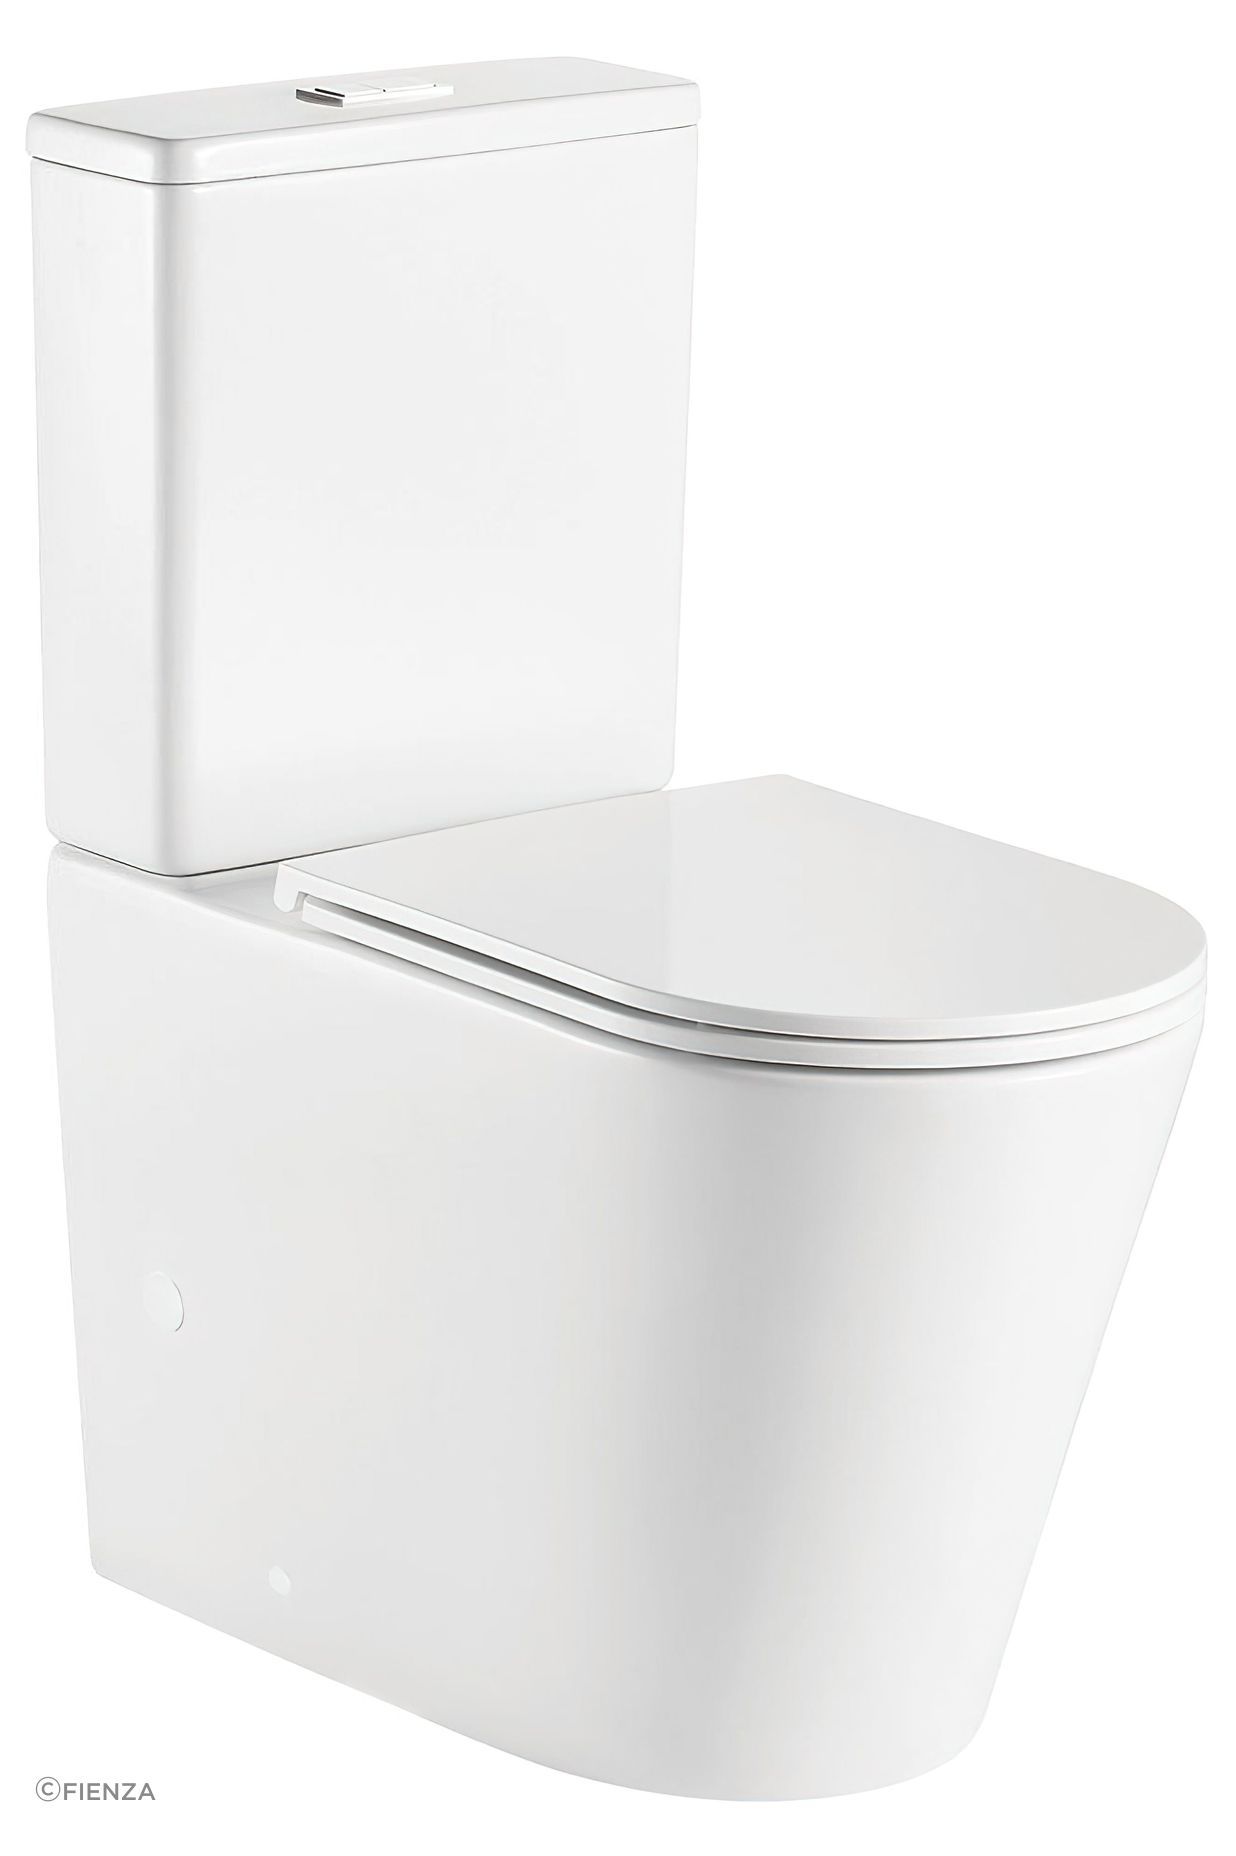 Kaya Back-To-Wall Toilet Suite - Fienza